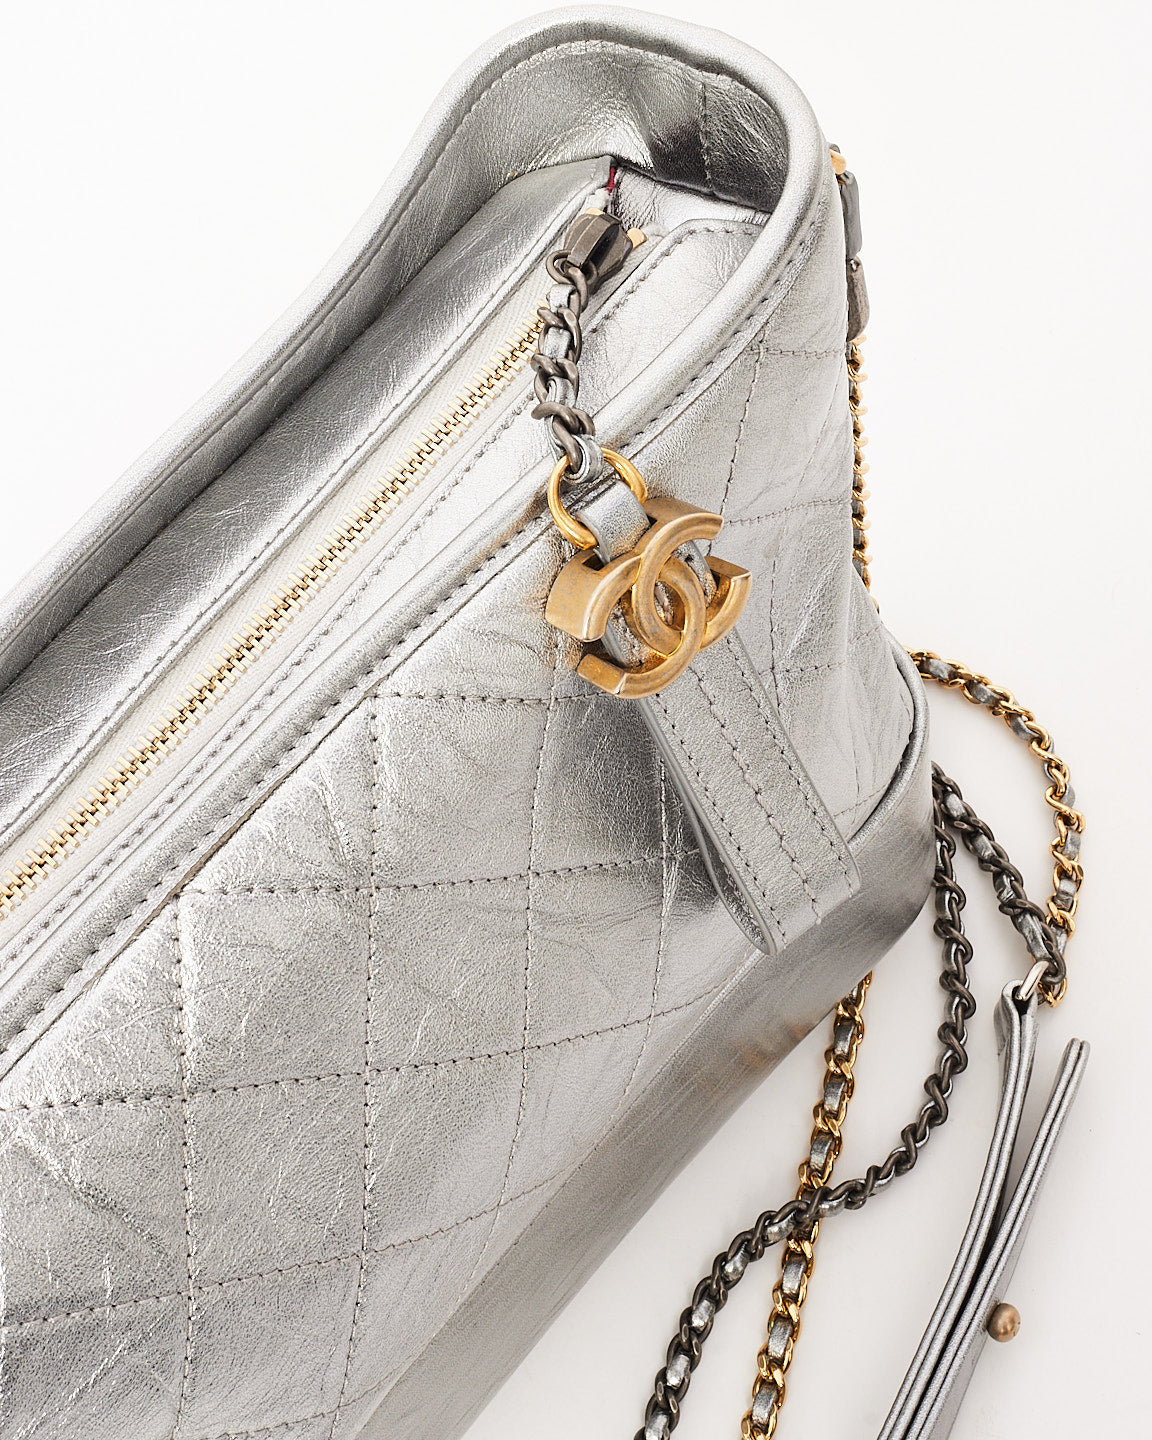 Chanel Silver Metallic Quilted Gabrielle Large Bag